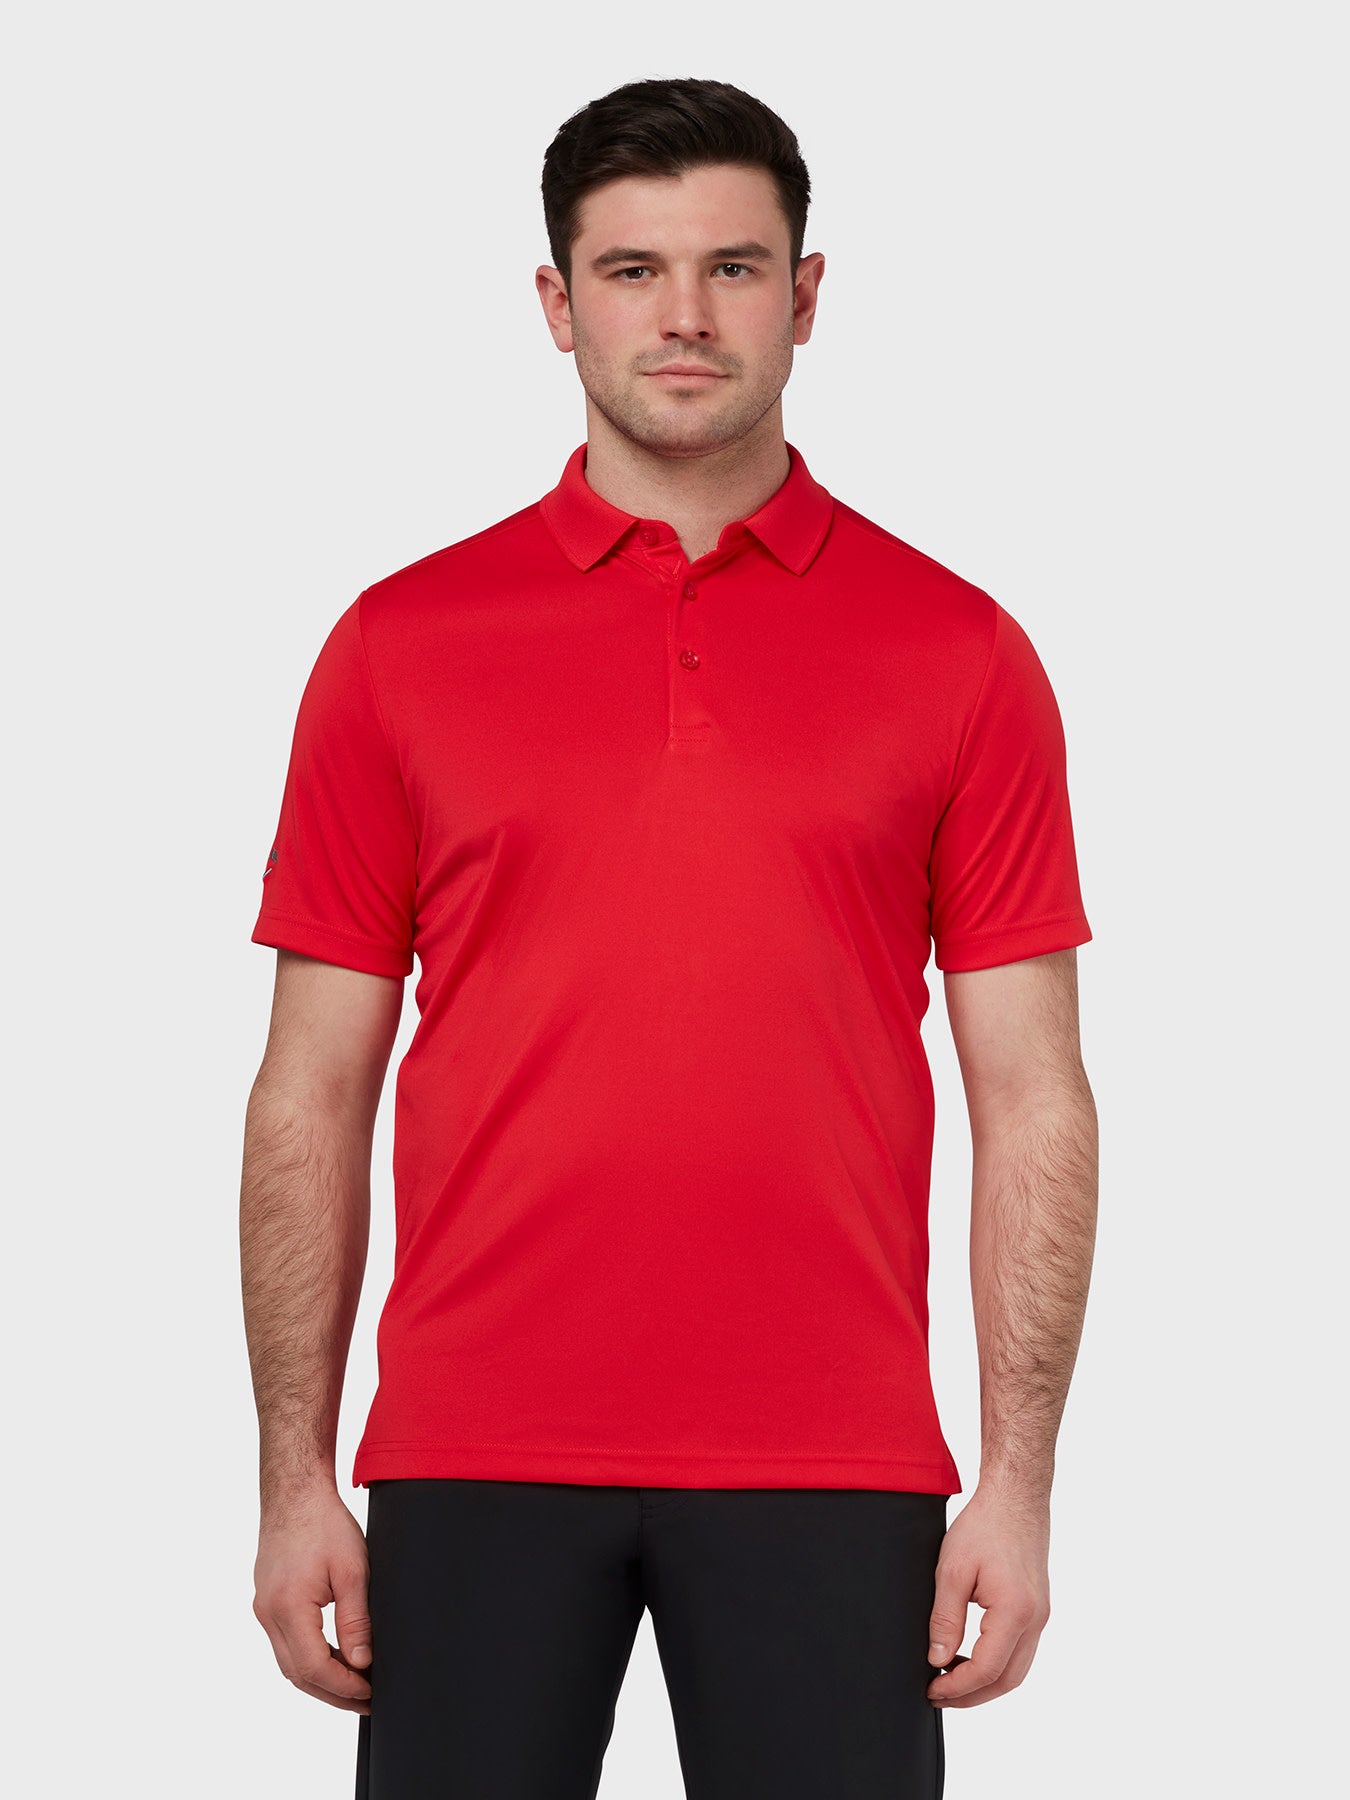 View Tournament Polo In True Red True Red XXL information